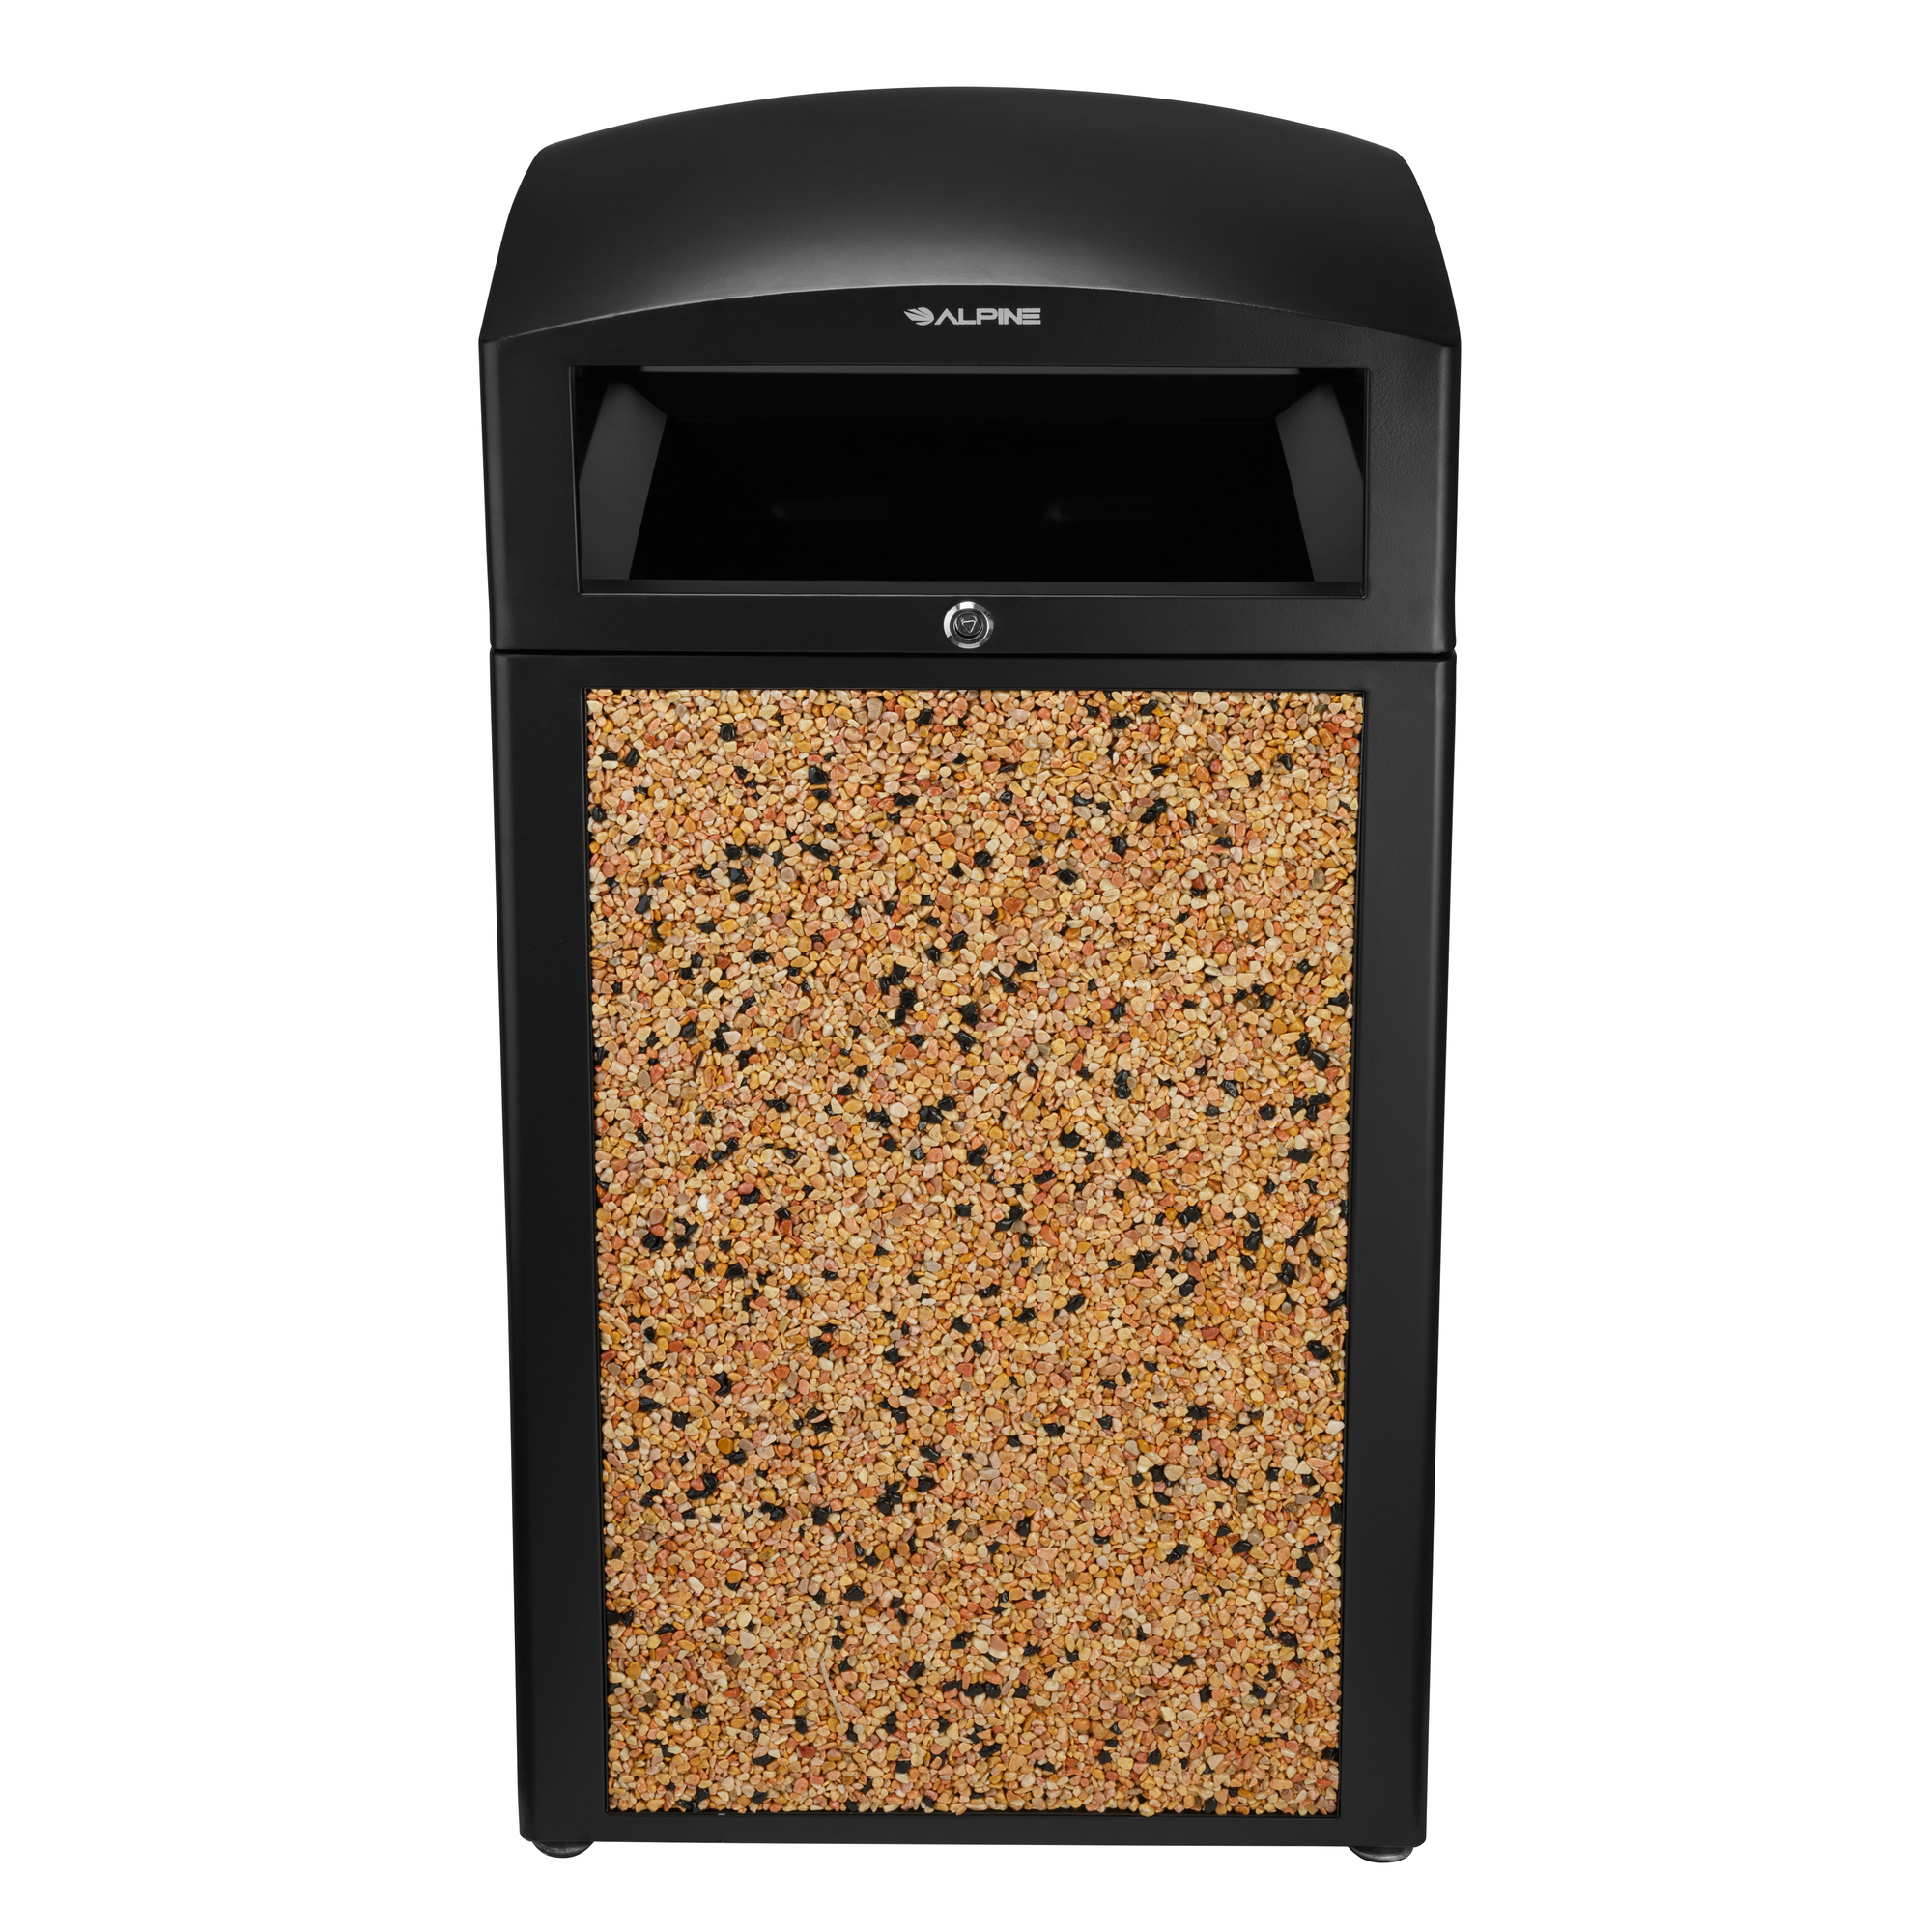 Alpine, 40-Gallon Outdoor Trash Can With Stone Panels, Capacity 40 Gal, Model ALP471-40-STO